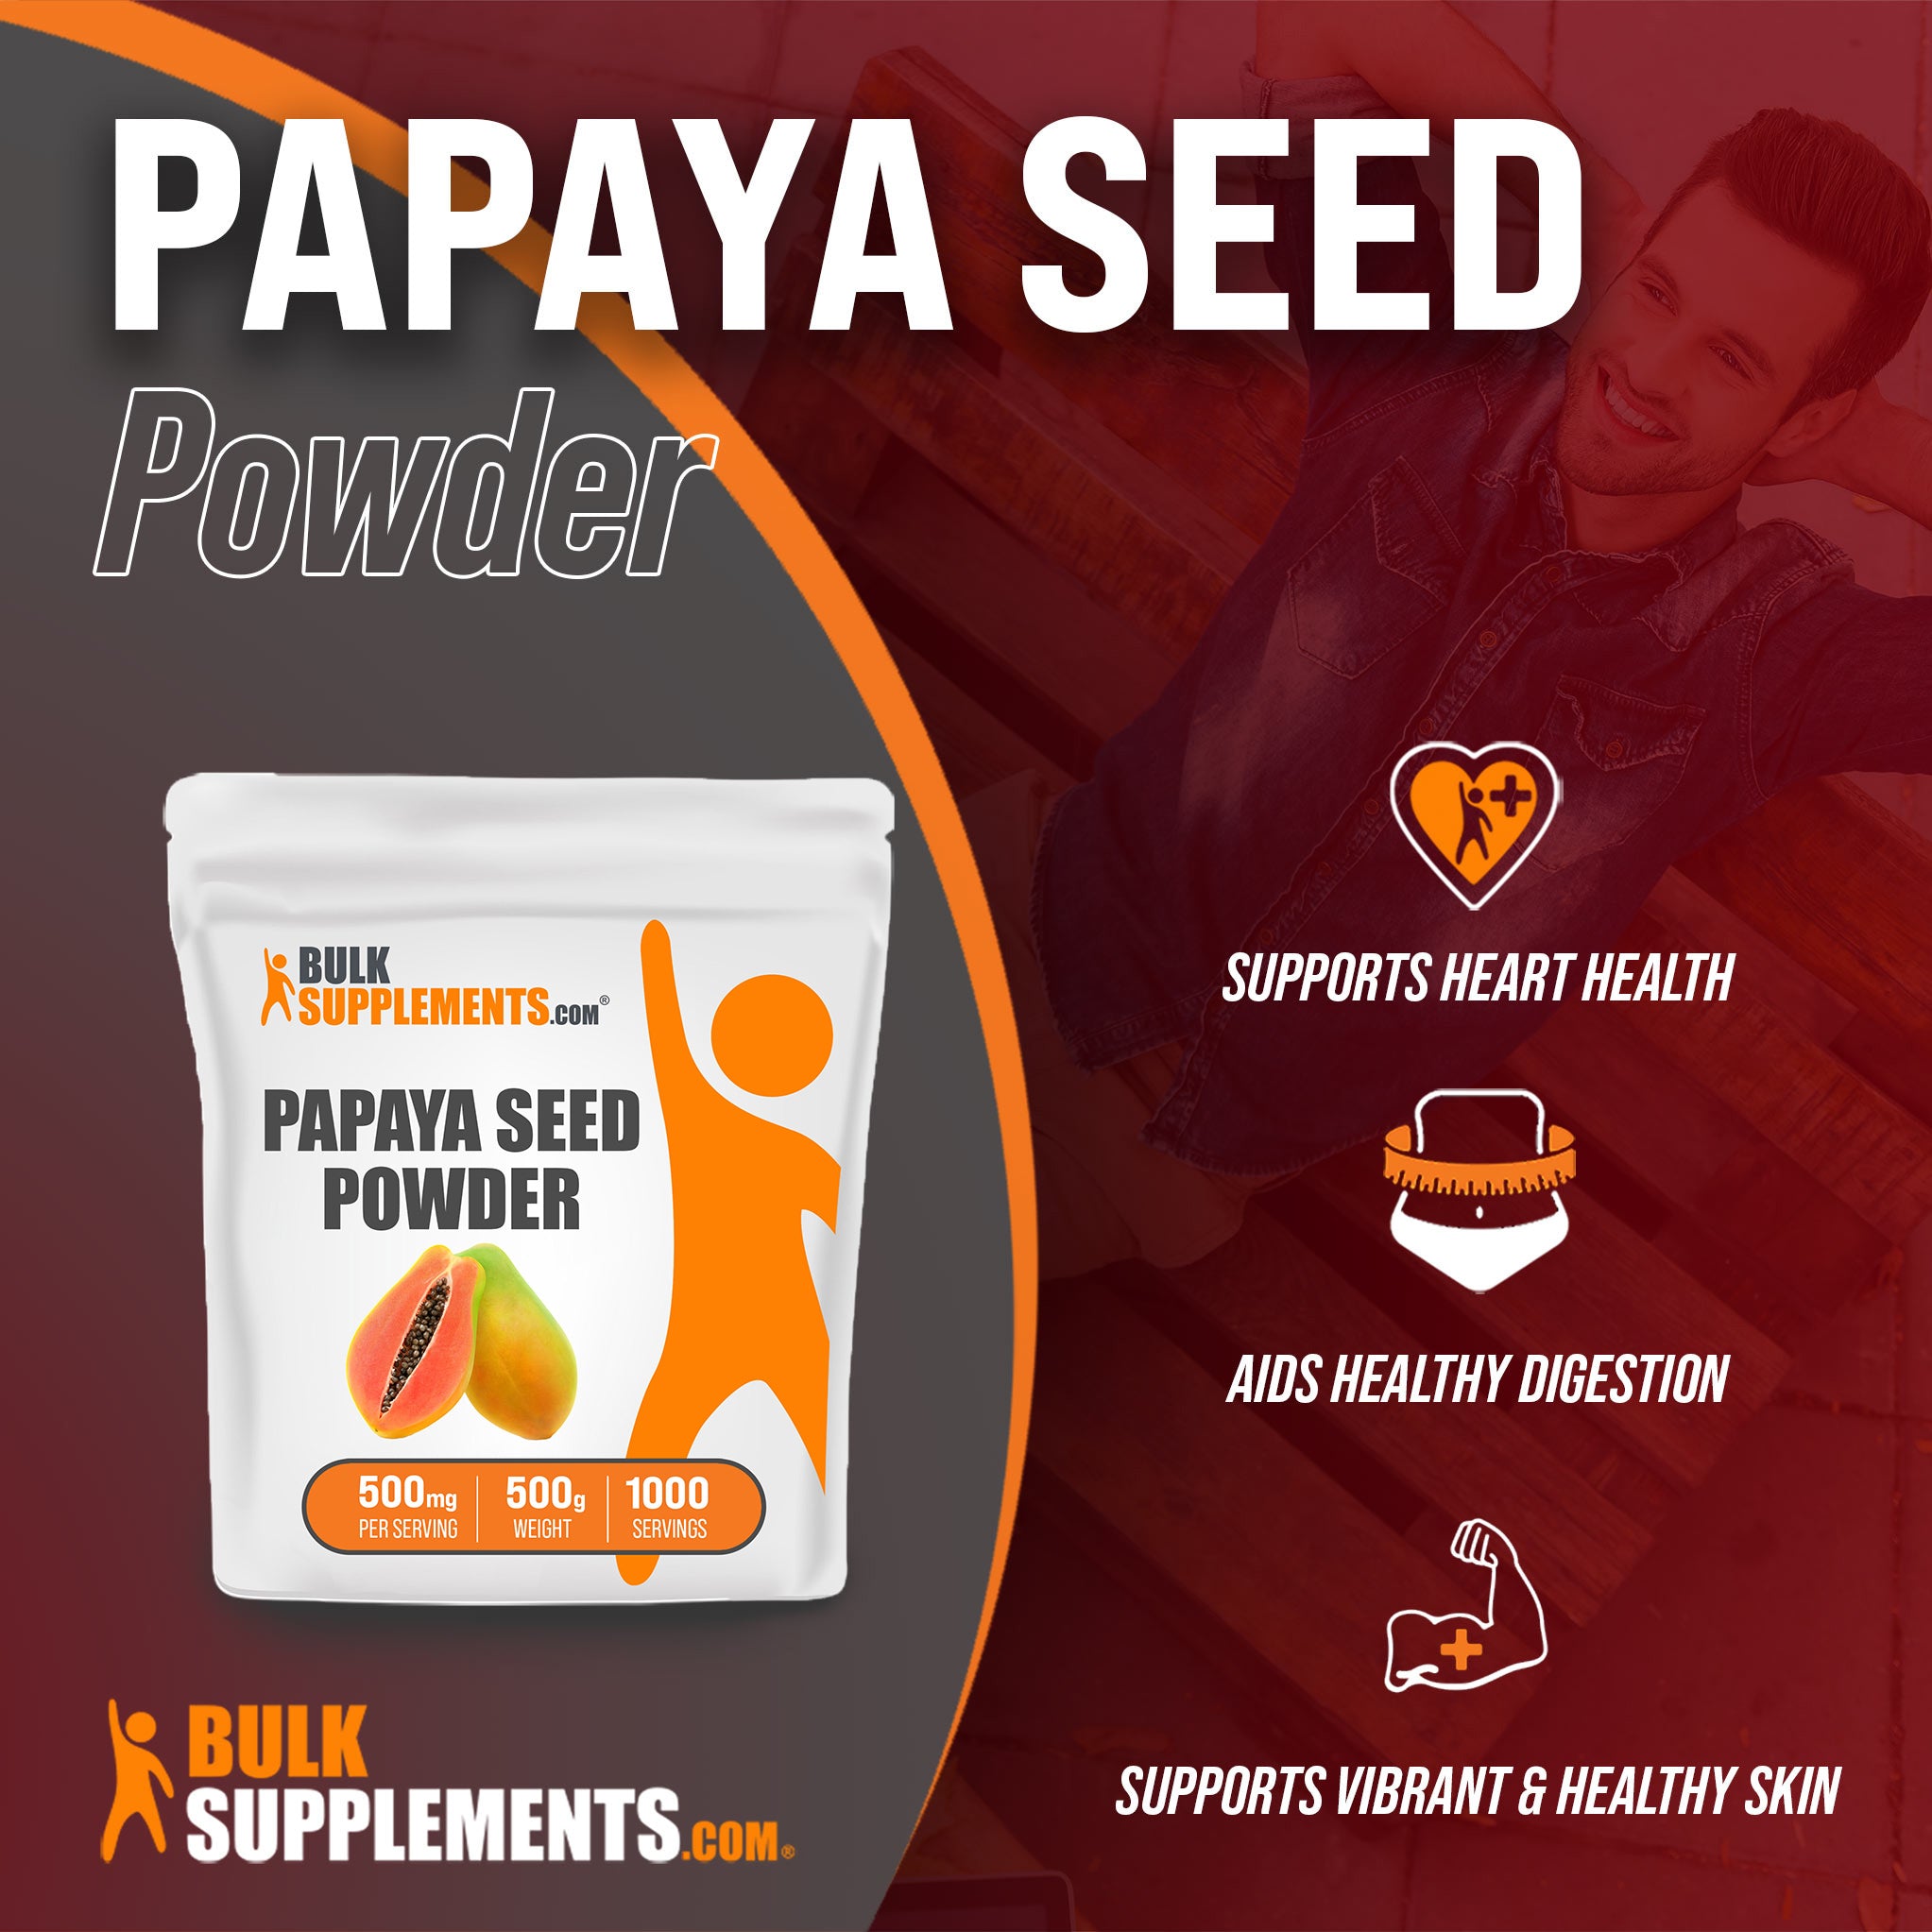 Benefits of Papaya Seed Powder: supports heart health, aids healthy digestion, supports vibrant and healthy skin